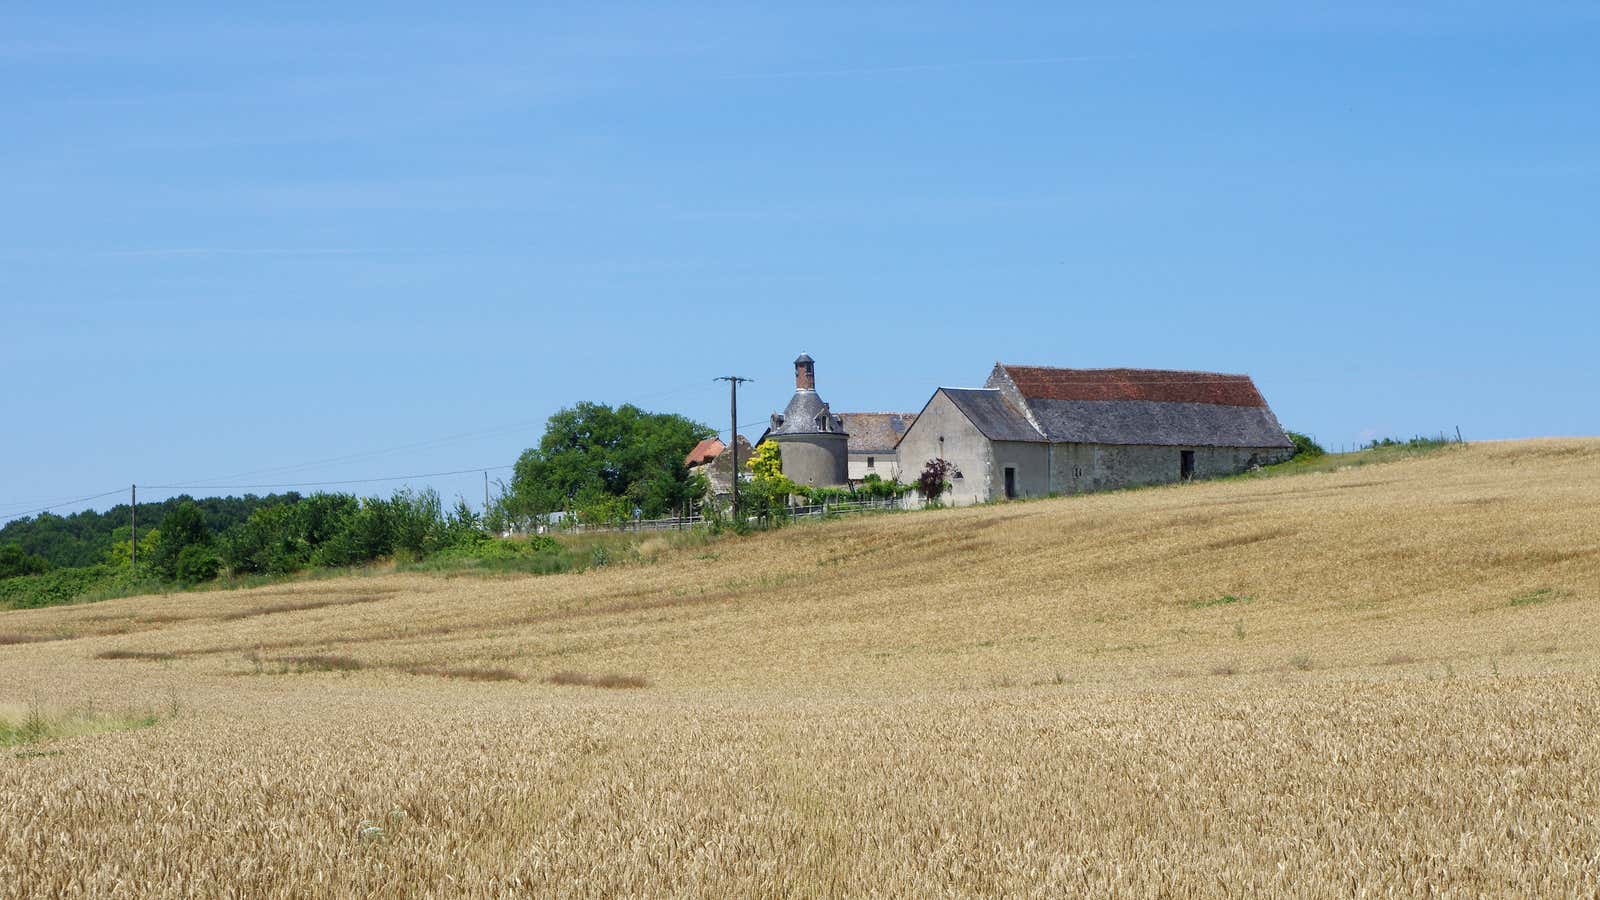 French farming isn’t as idyllic as it appears in photos.